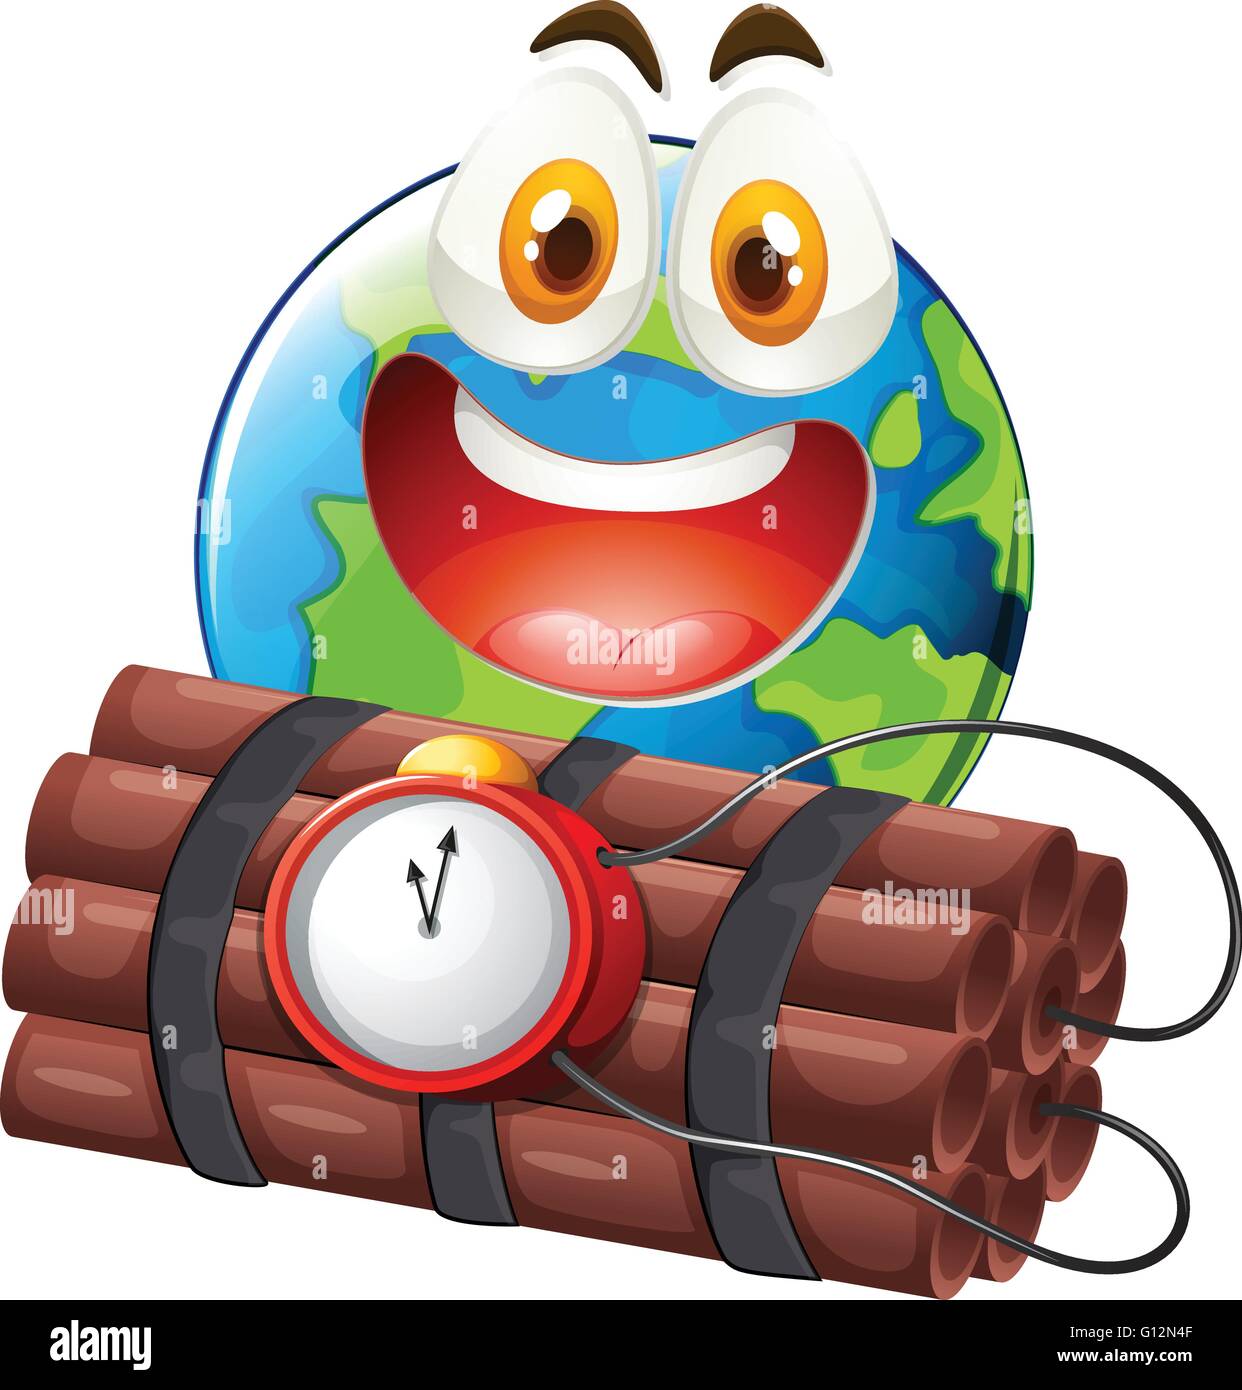 Earth with happy face and time bomb illustration Stock Vector